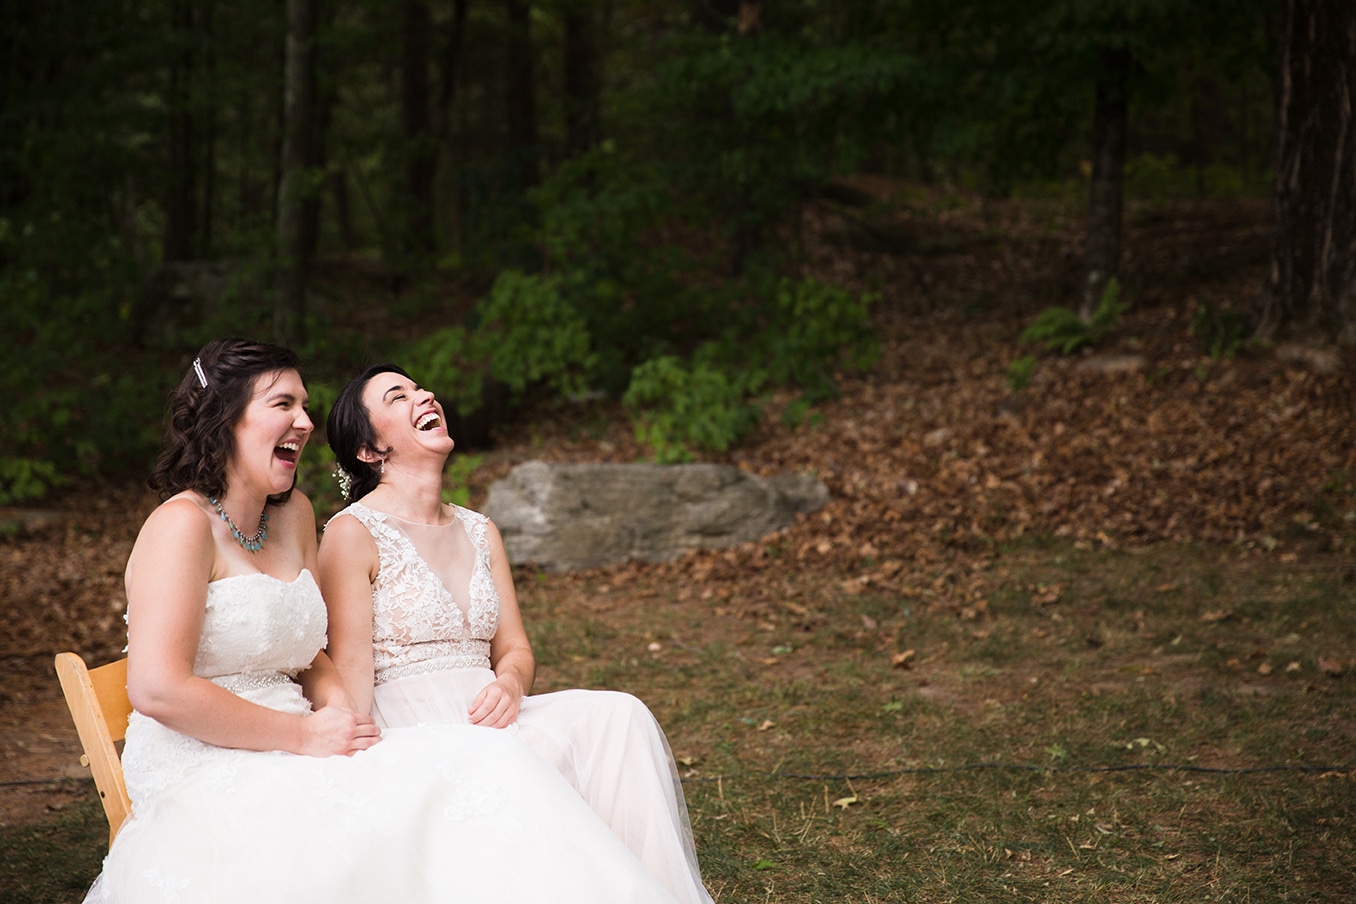 A documentary photograph of two brides laughing during their outdoor wedding ceremony at Friendly Crossways Wedding venue